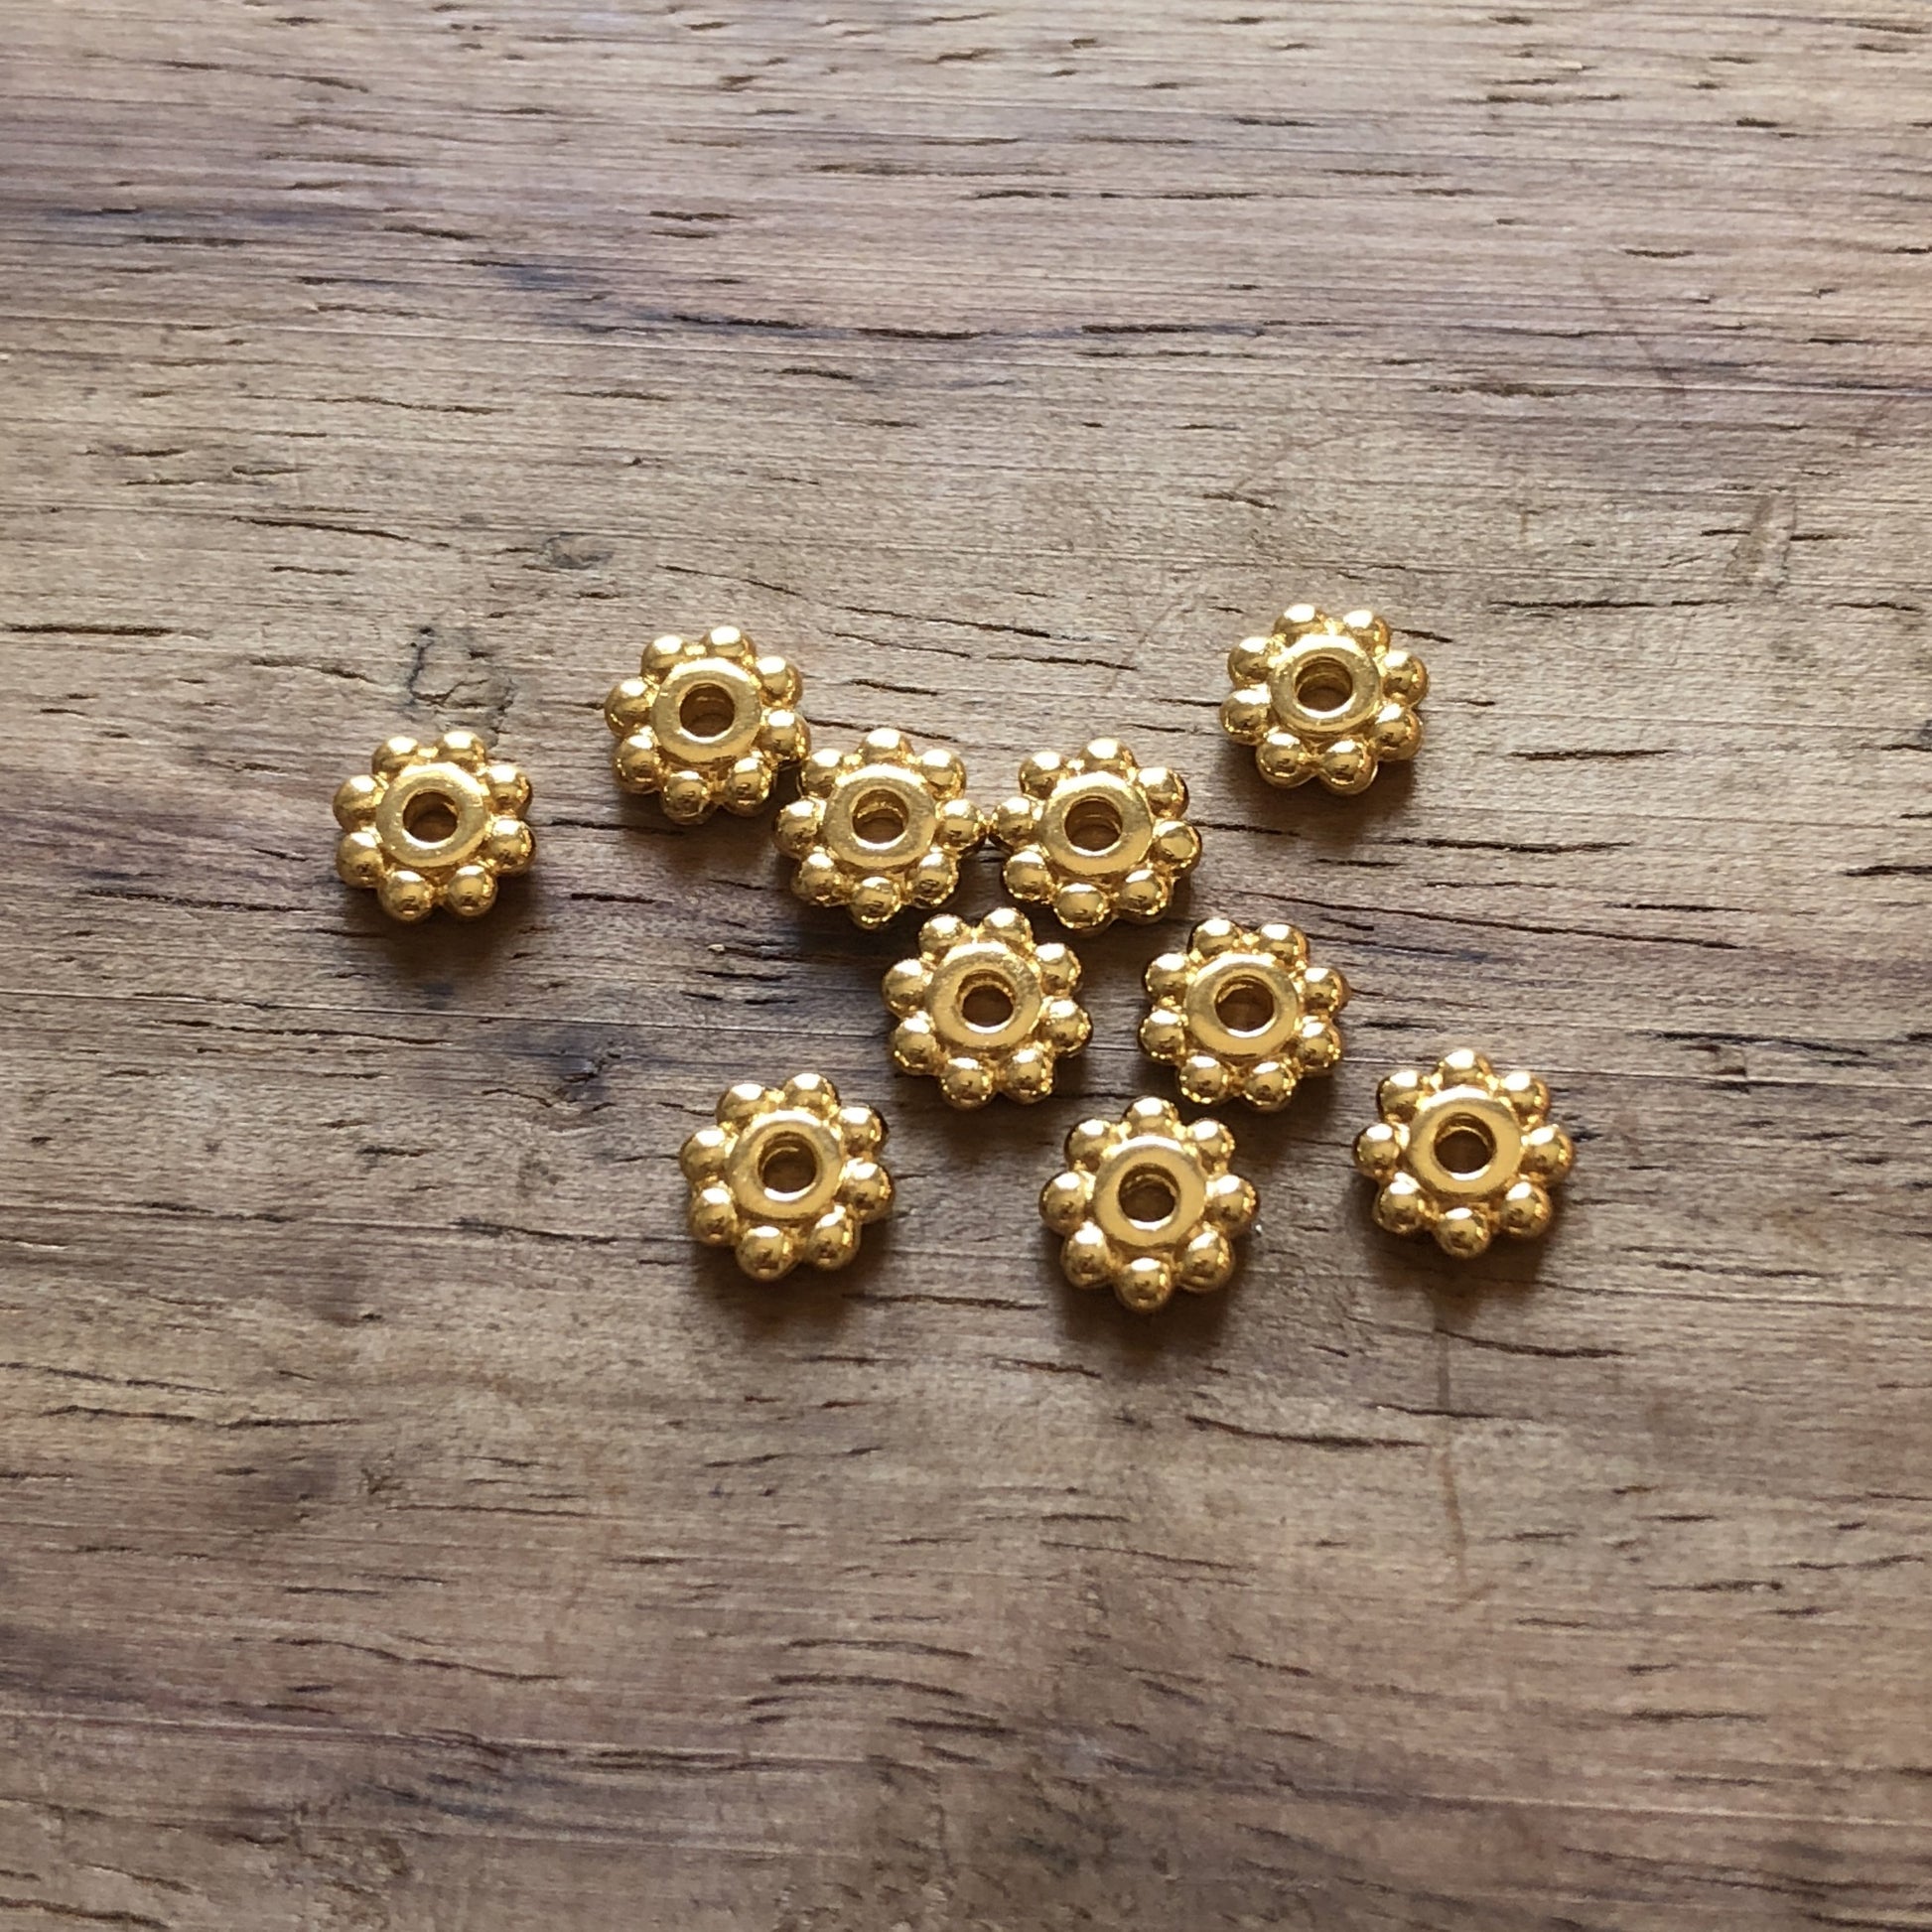 6mm Daisy Spacer Bead (4 Colors Available) - 10 pcs.